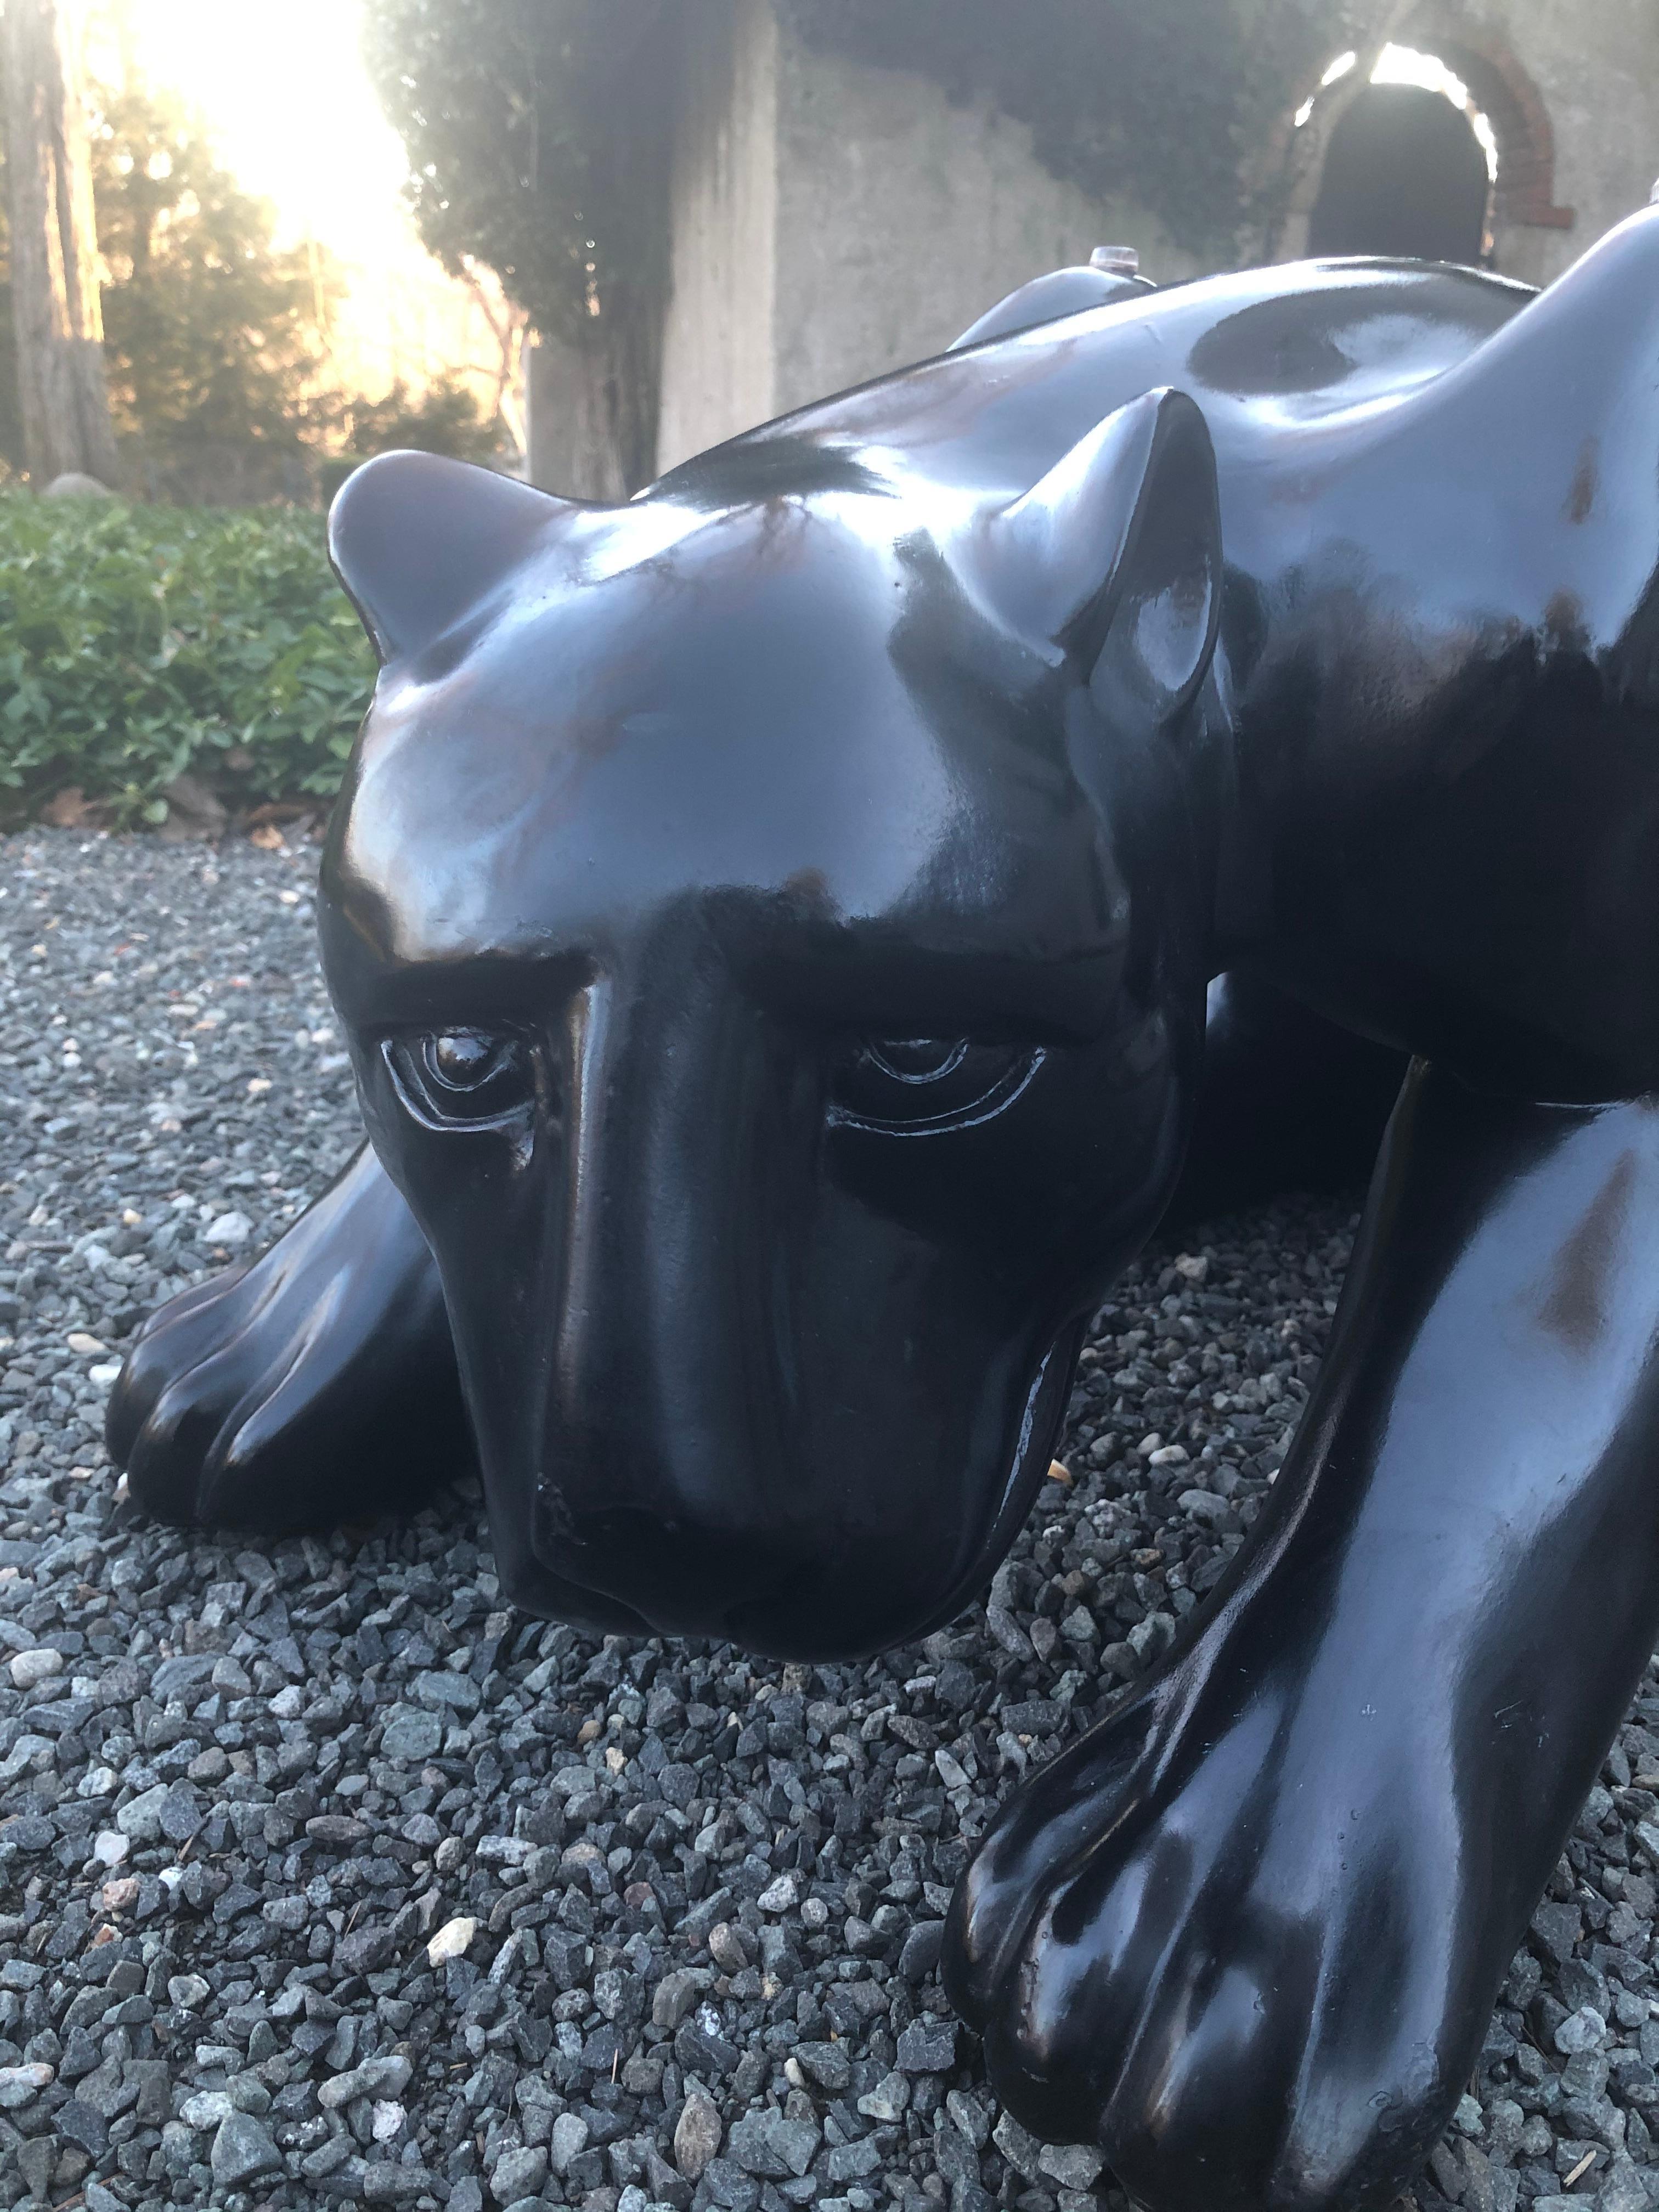 North American Dramatic Ceramic Black Panther Coffee Table or Sculpture